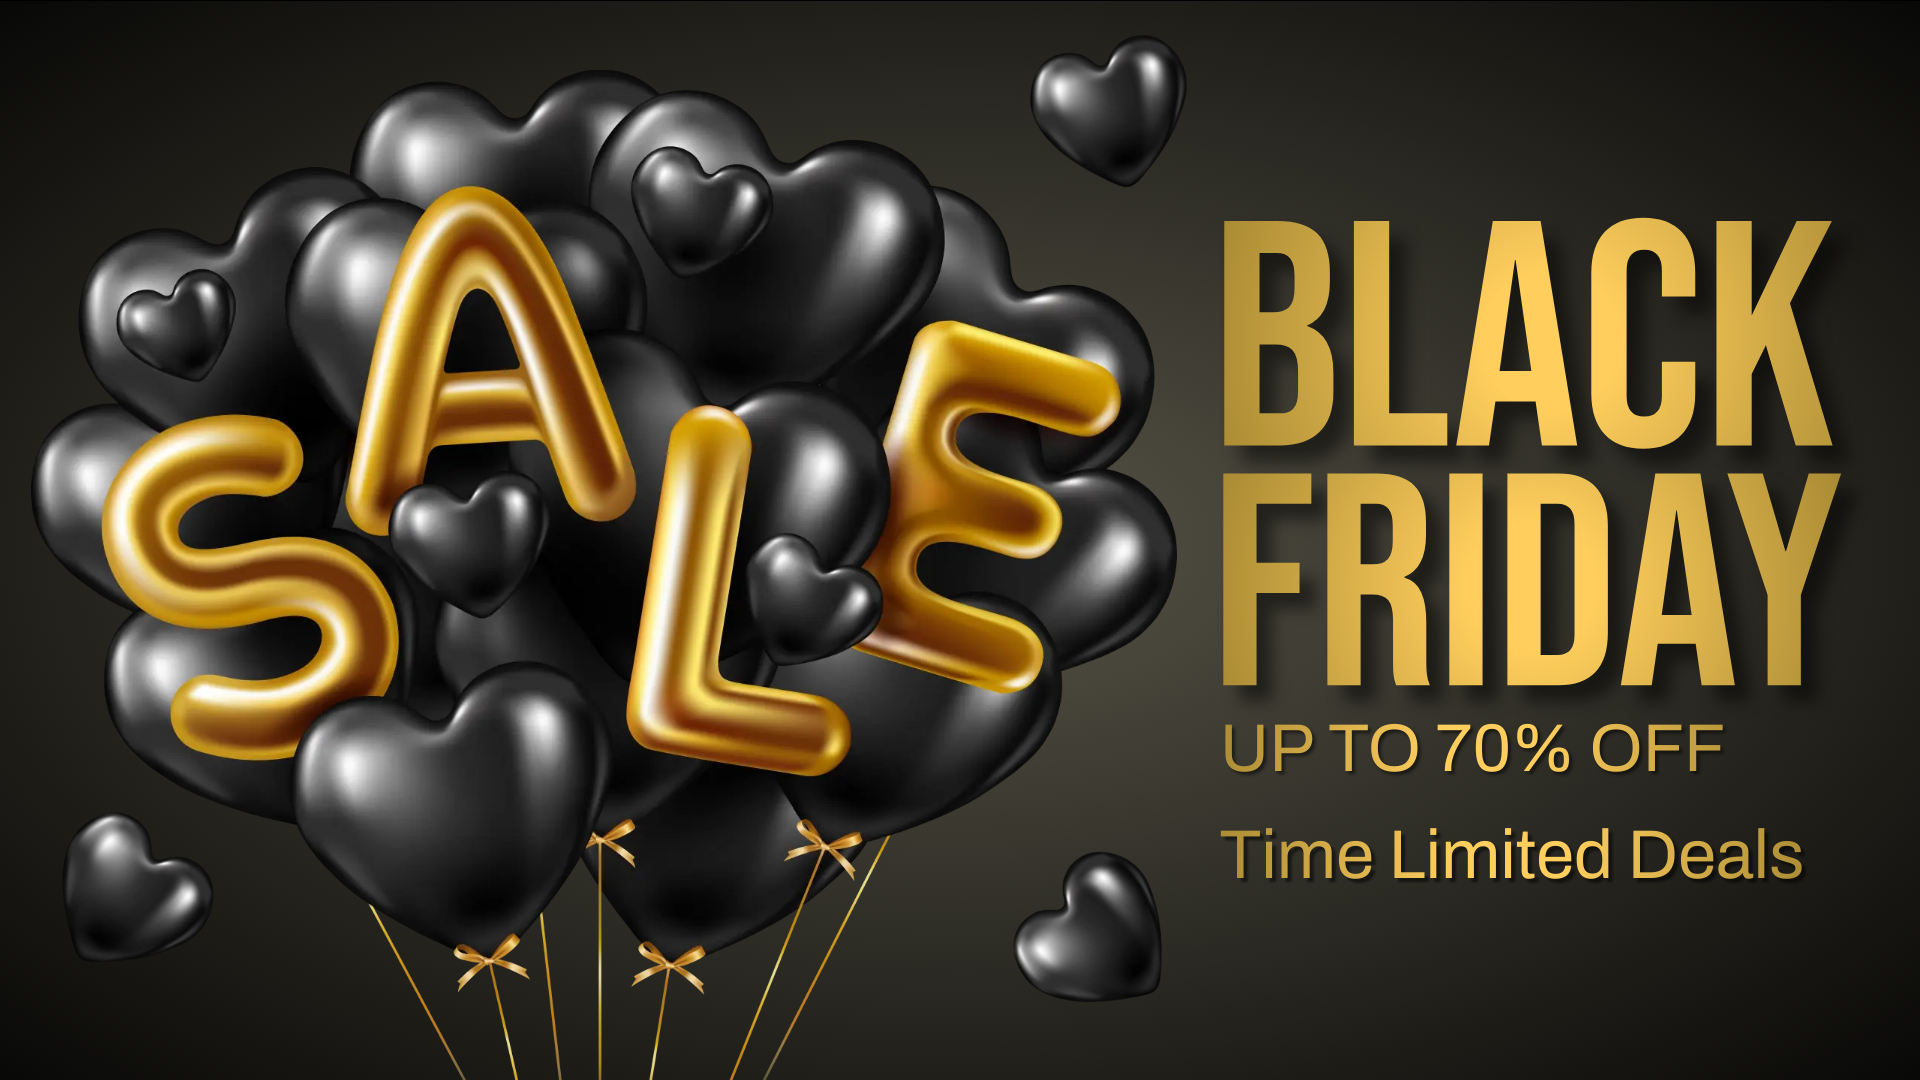 premiumonlinevaping.com best black friday deal for vaping products black friday sale made with postermywall